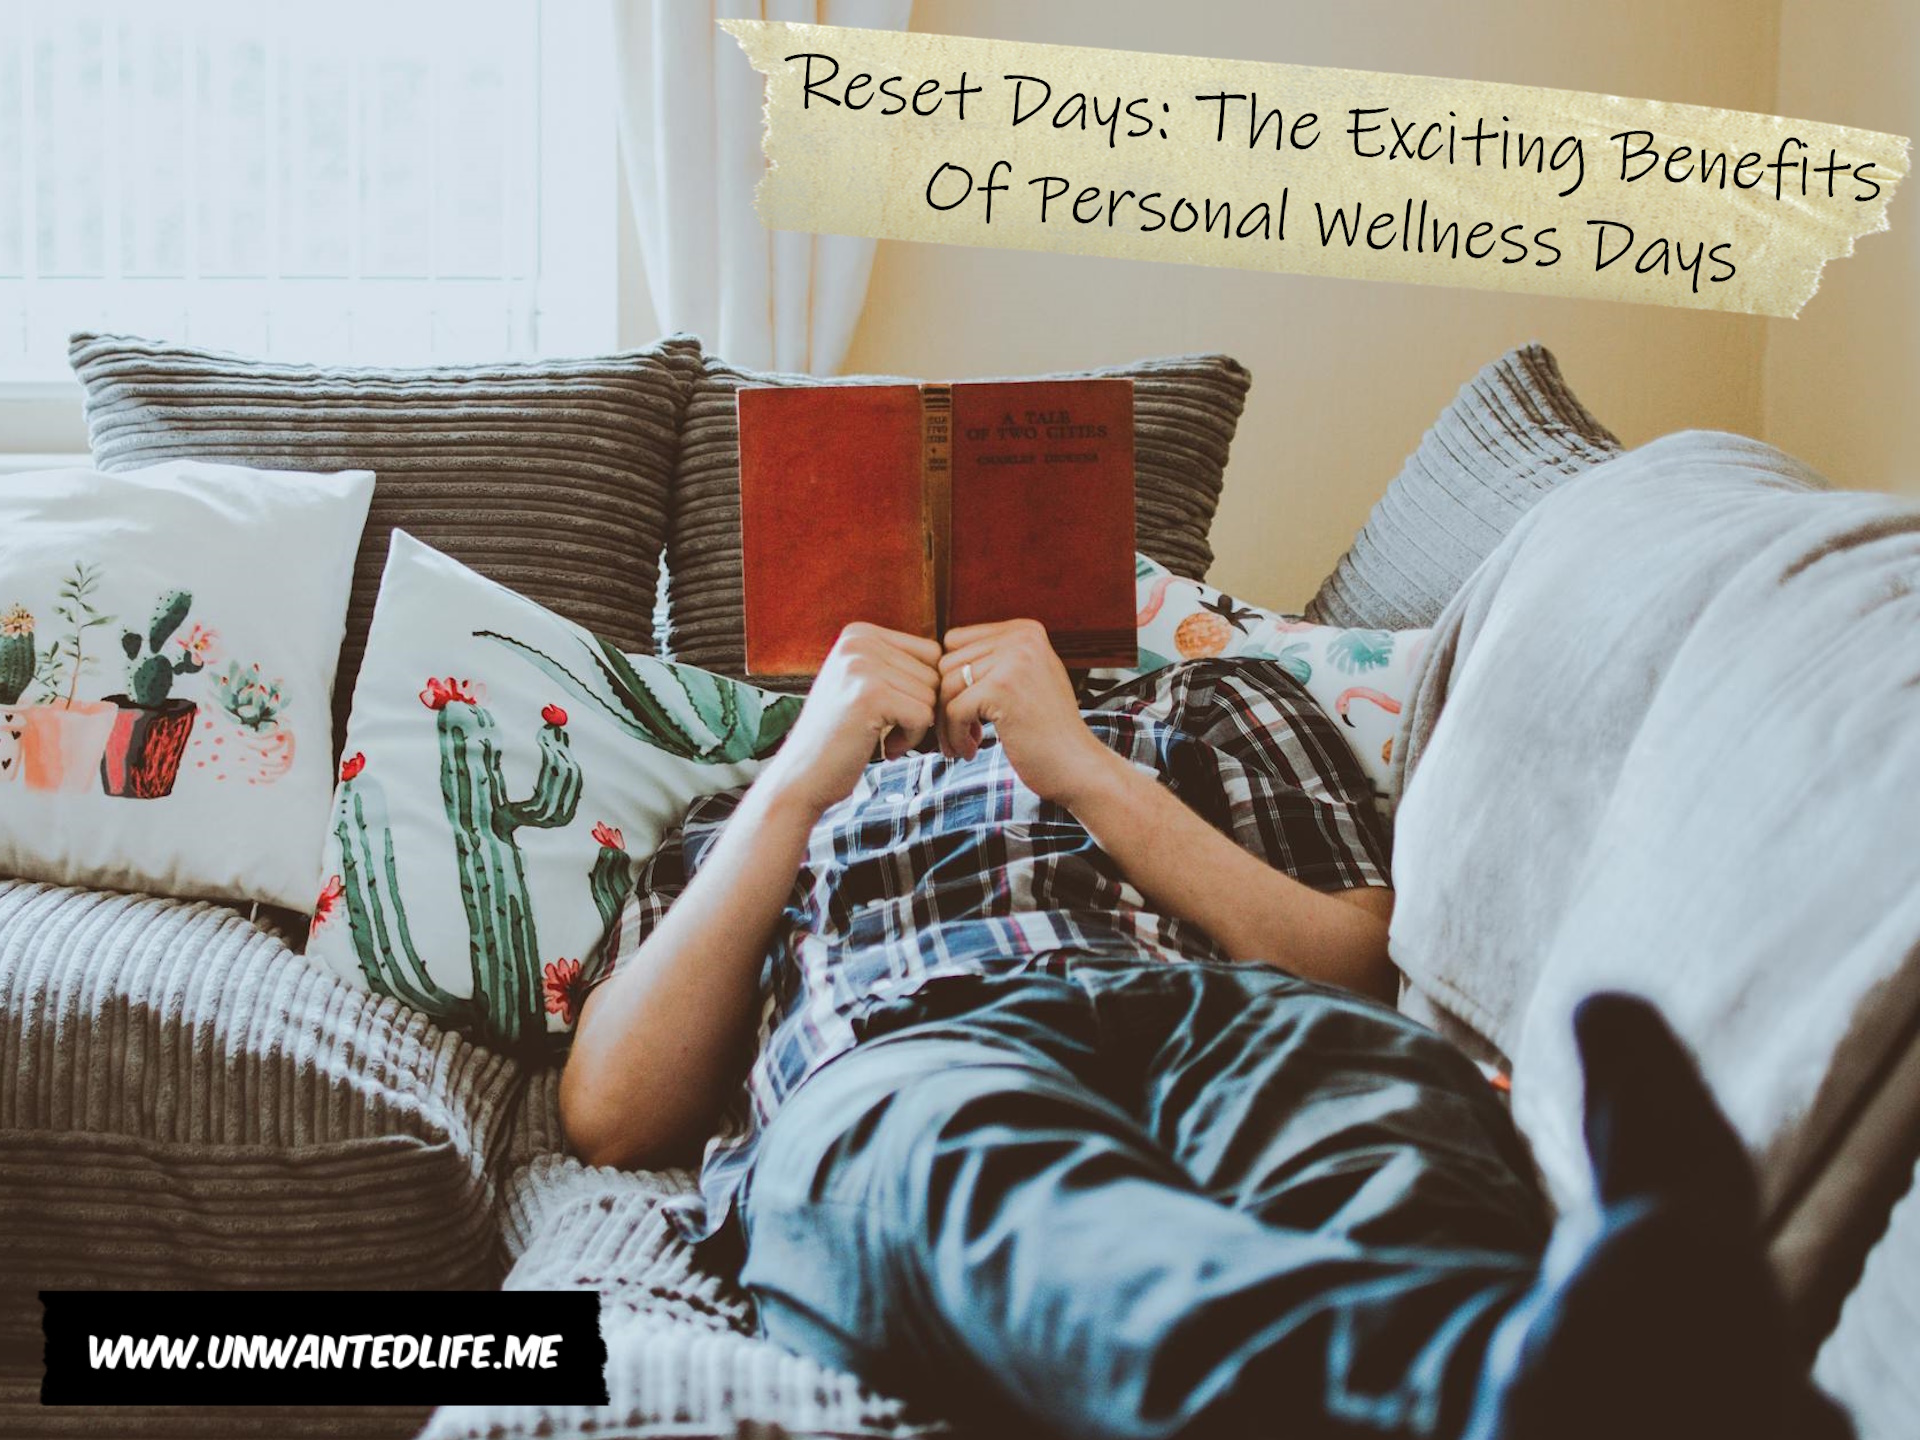 A photo of a man reading a book while laying on a sofa to represent the topic of the article - Reset Days: The Exciting Benefits Of Personal Wellness Days